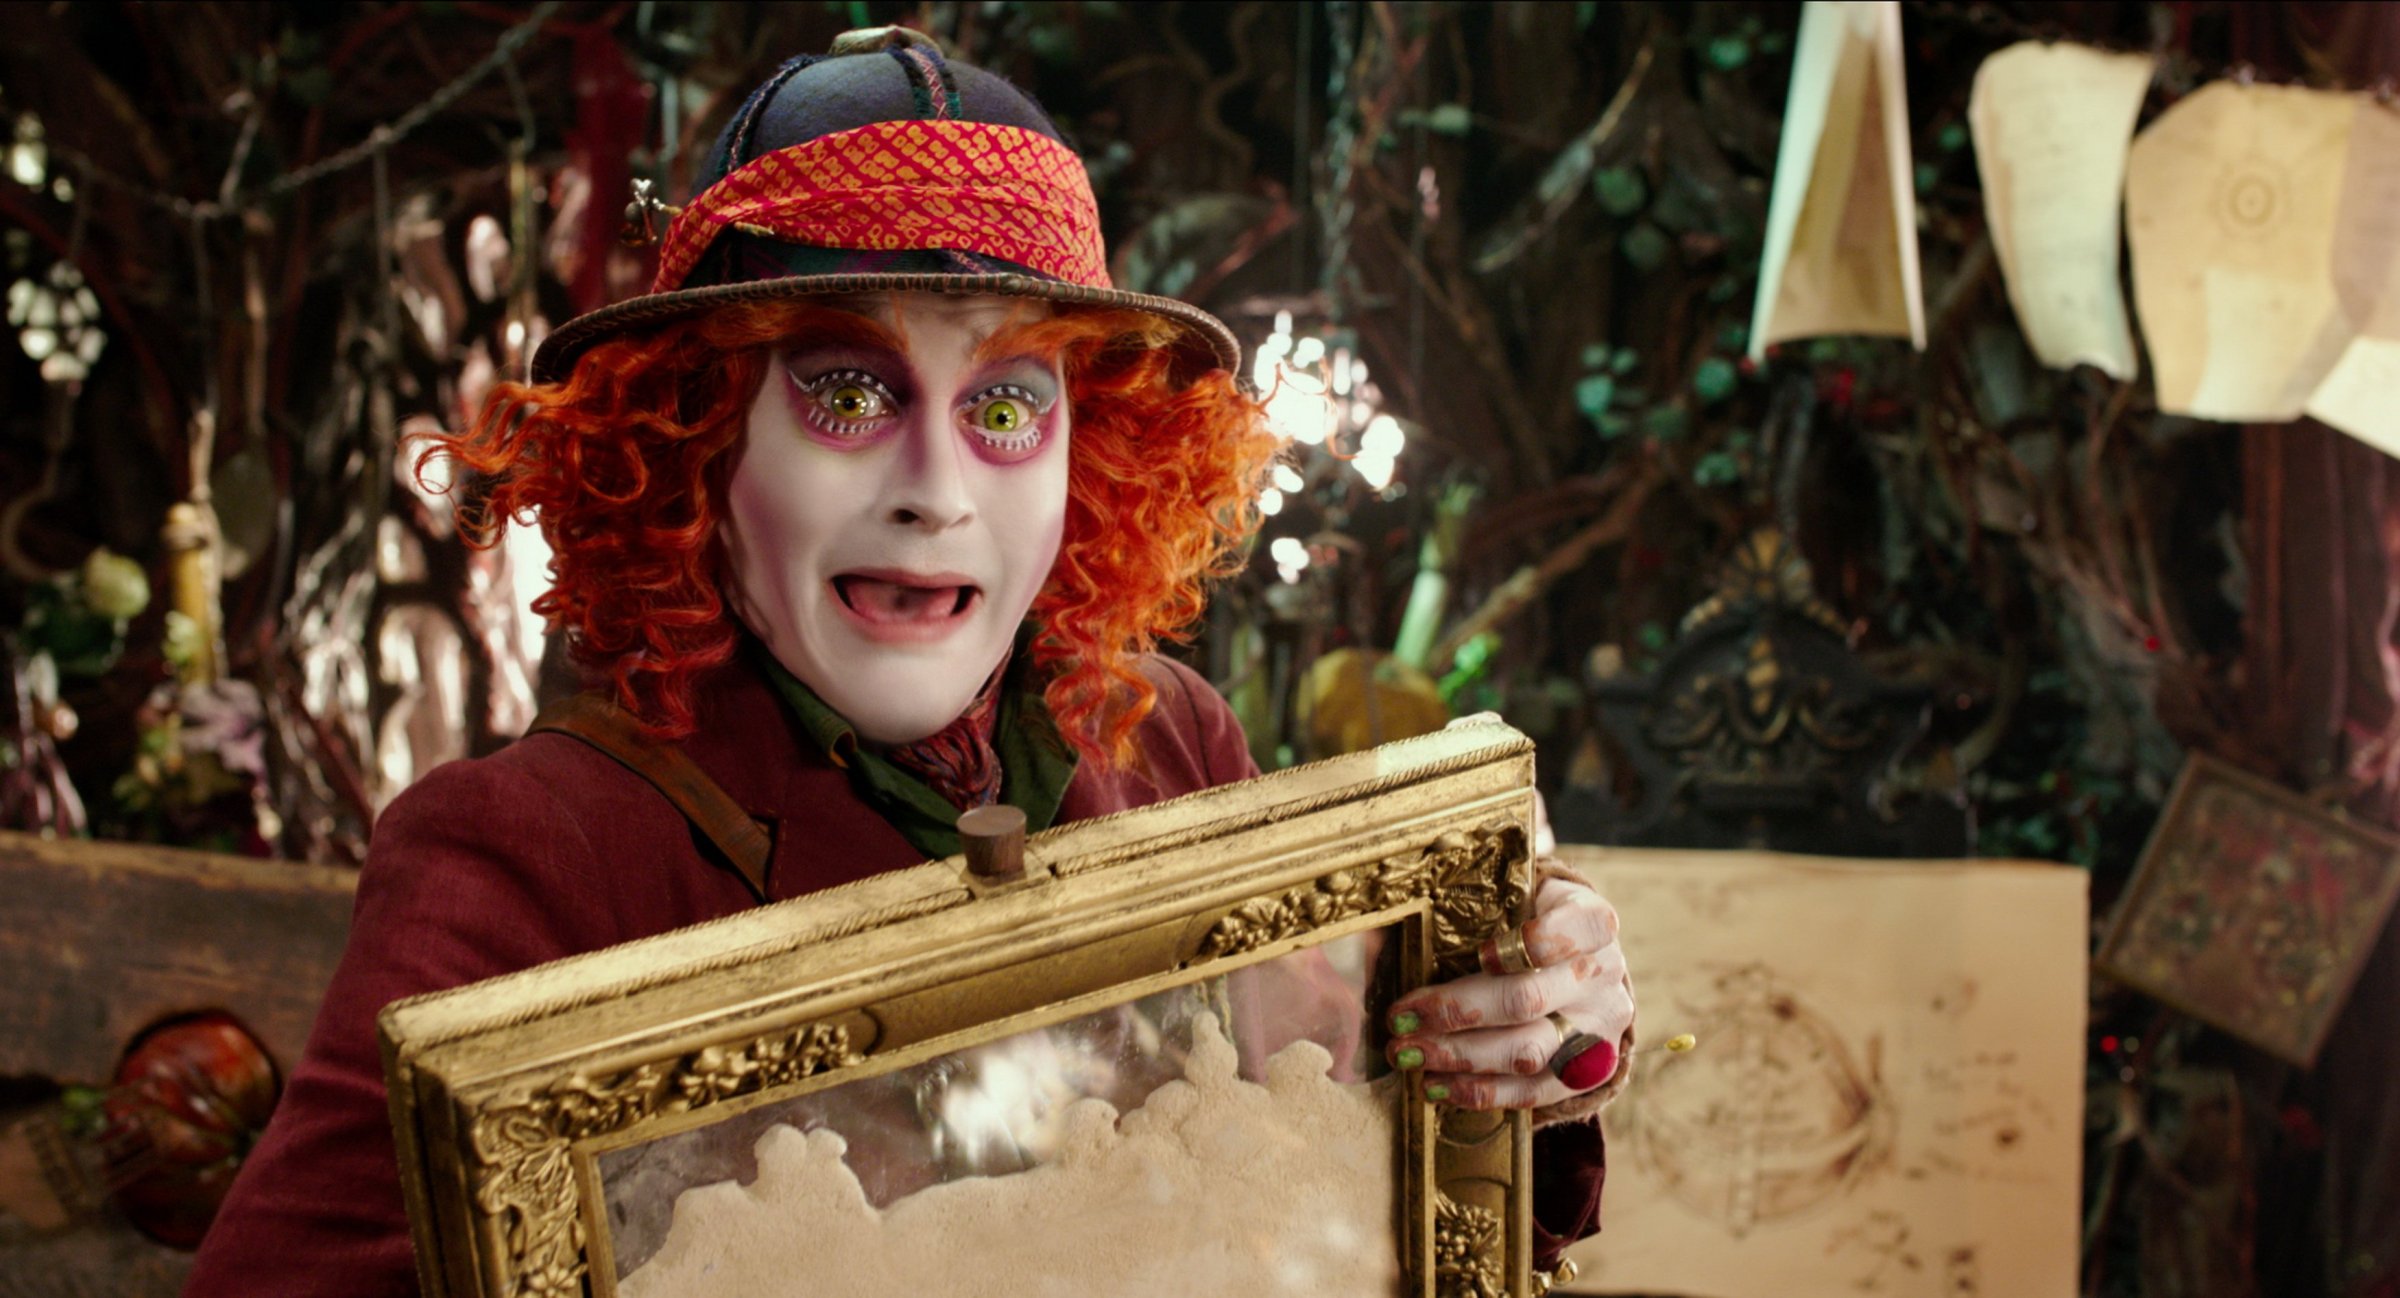 Johnny Depp as Tarrant Hightopp, the Mad Hatter in Alice Through the Looking Glass.